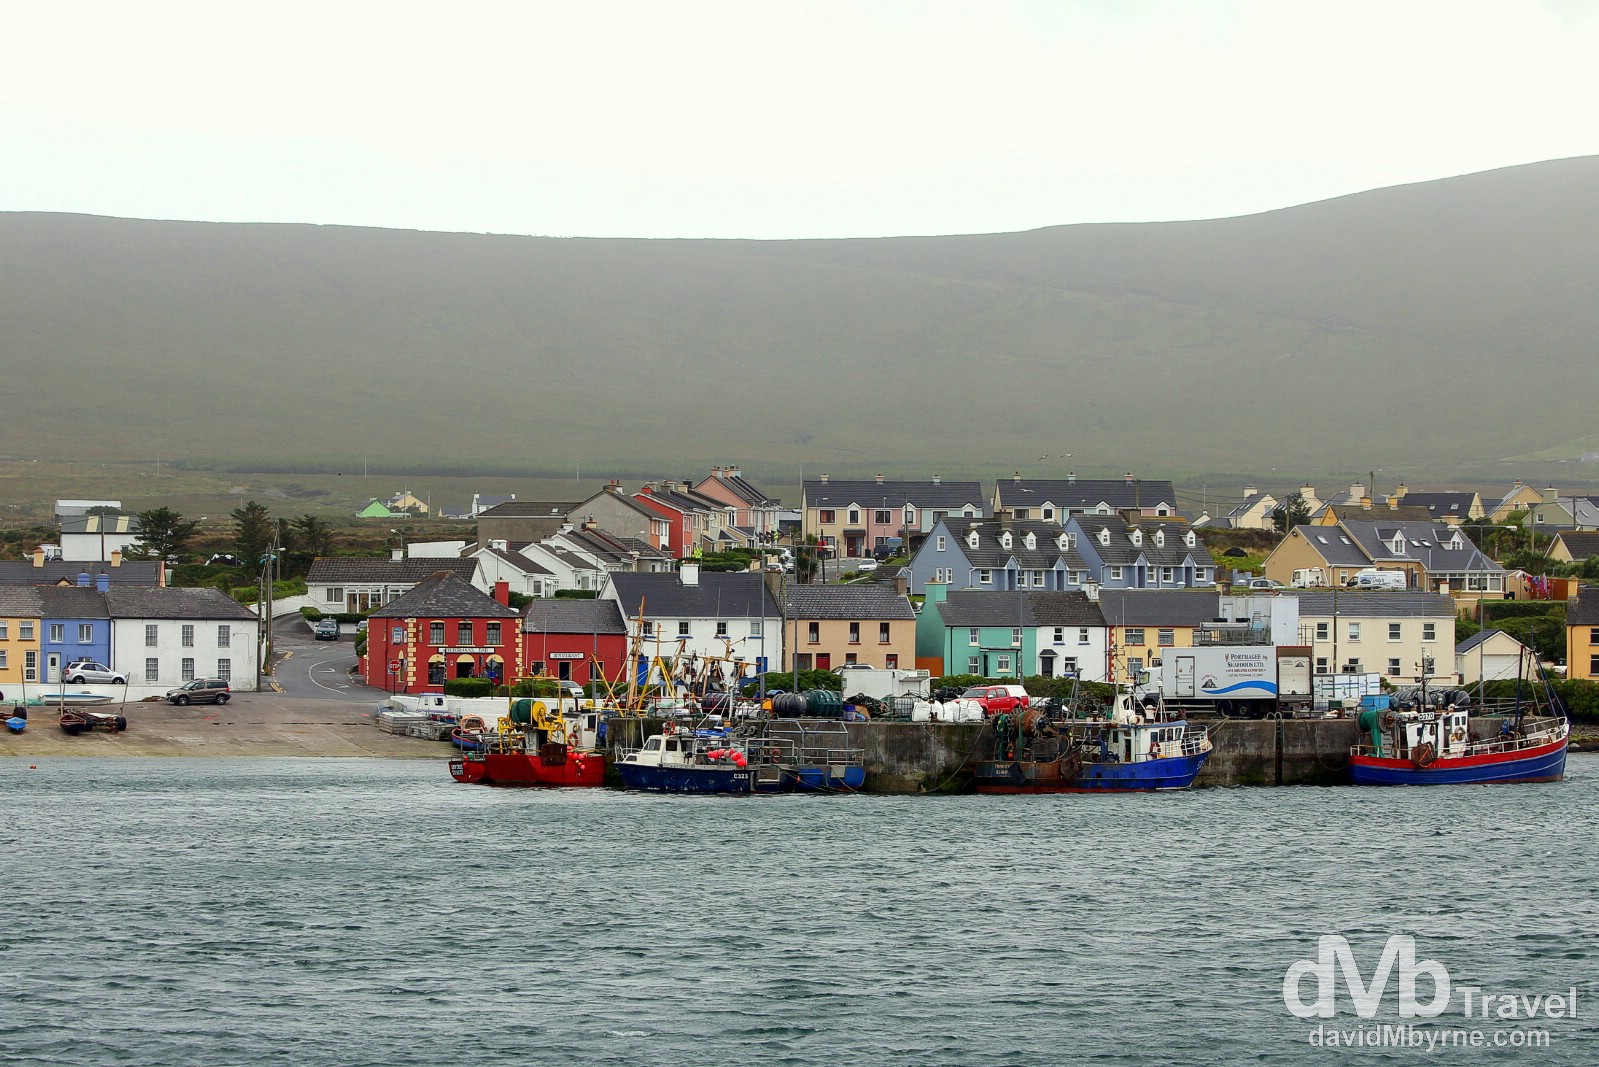 Portmagee as seen from Valencia Island, Co. Kerry, Ireland. August 29, 2014.